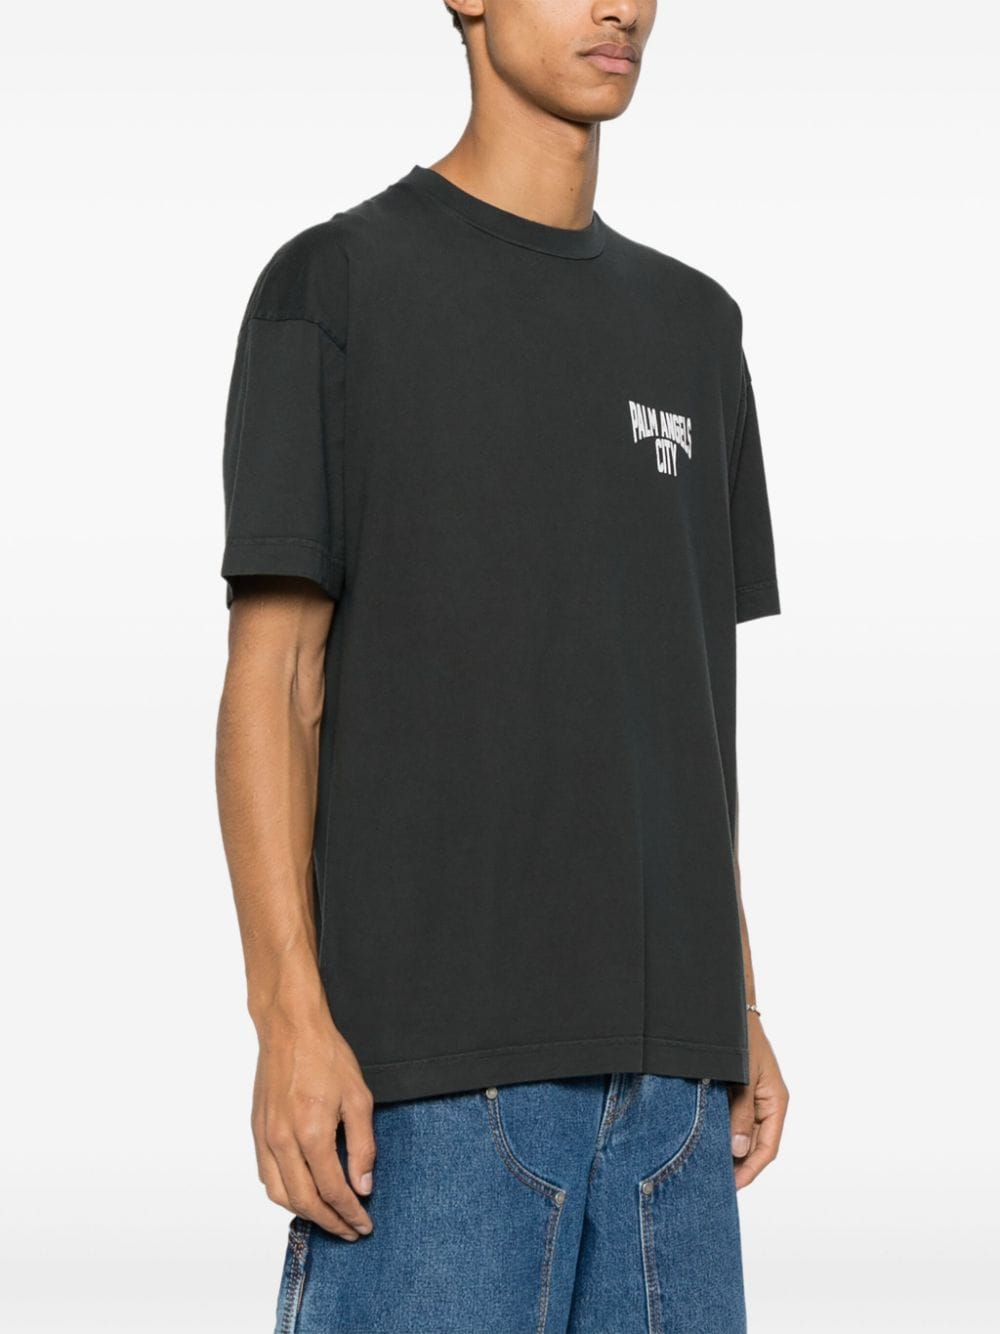 PALM ANGELS Cool City Washed T-Shirt for Men